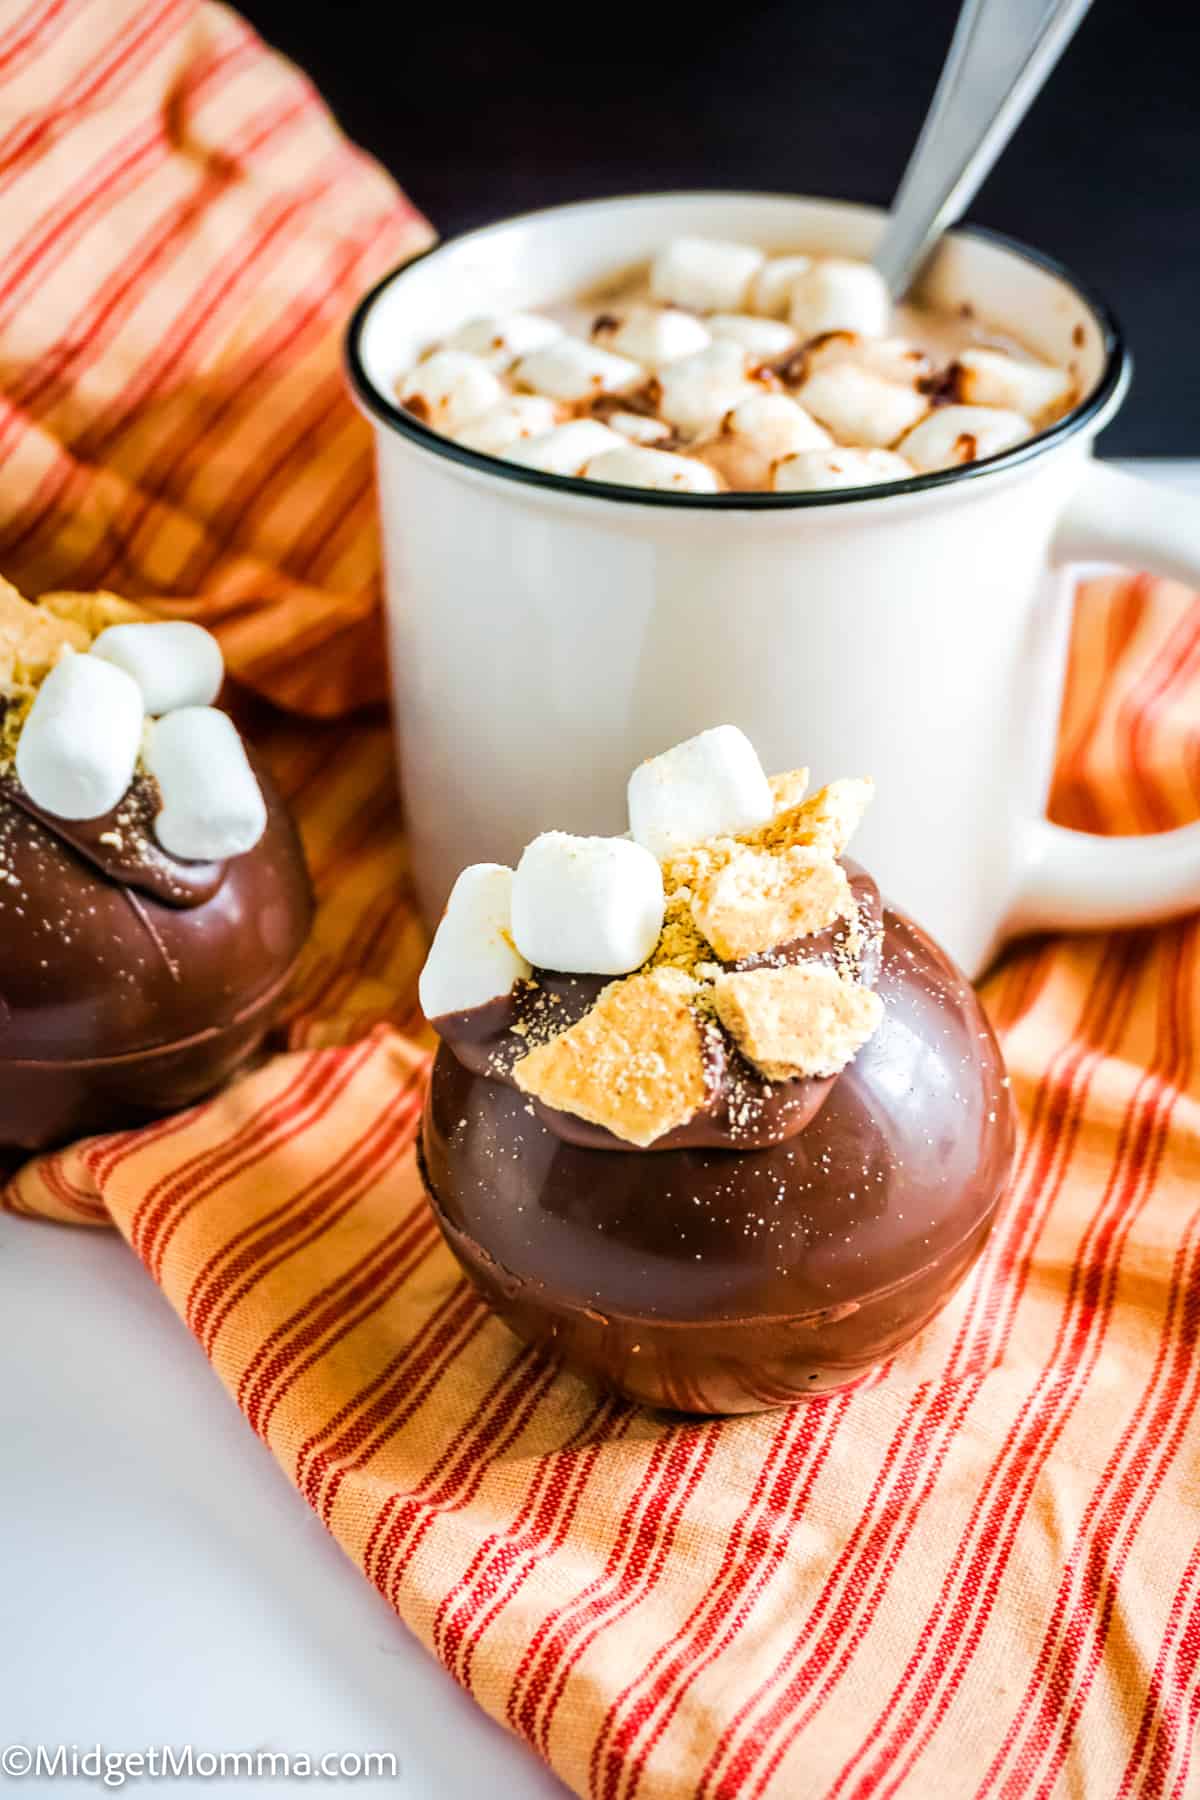 2 smores hot chocolate bombs and a cup of hot chocolate